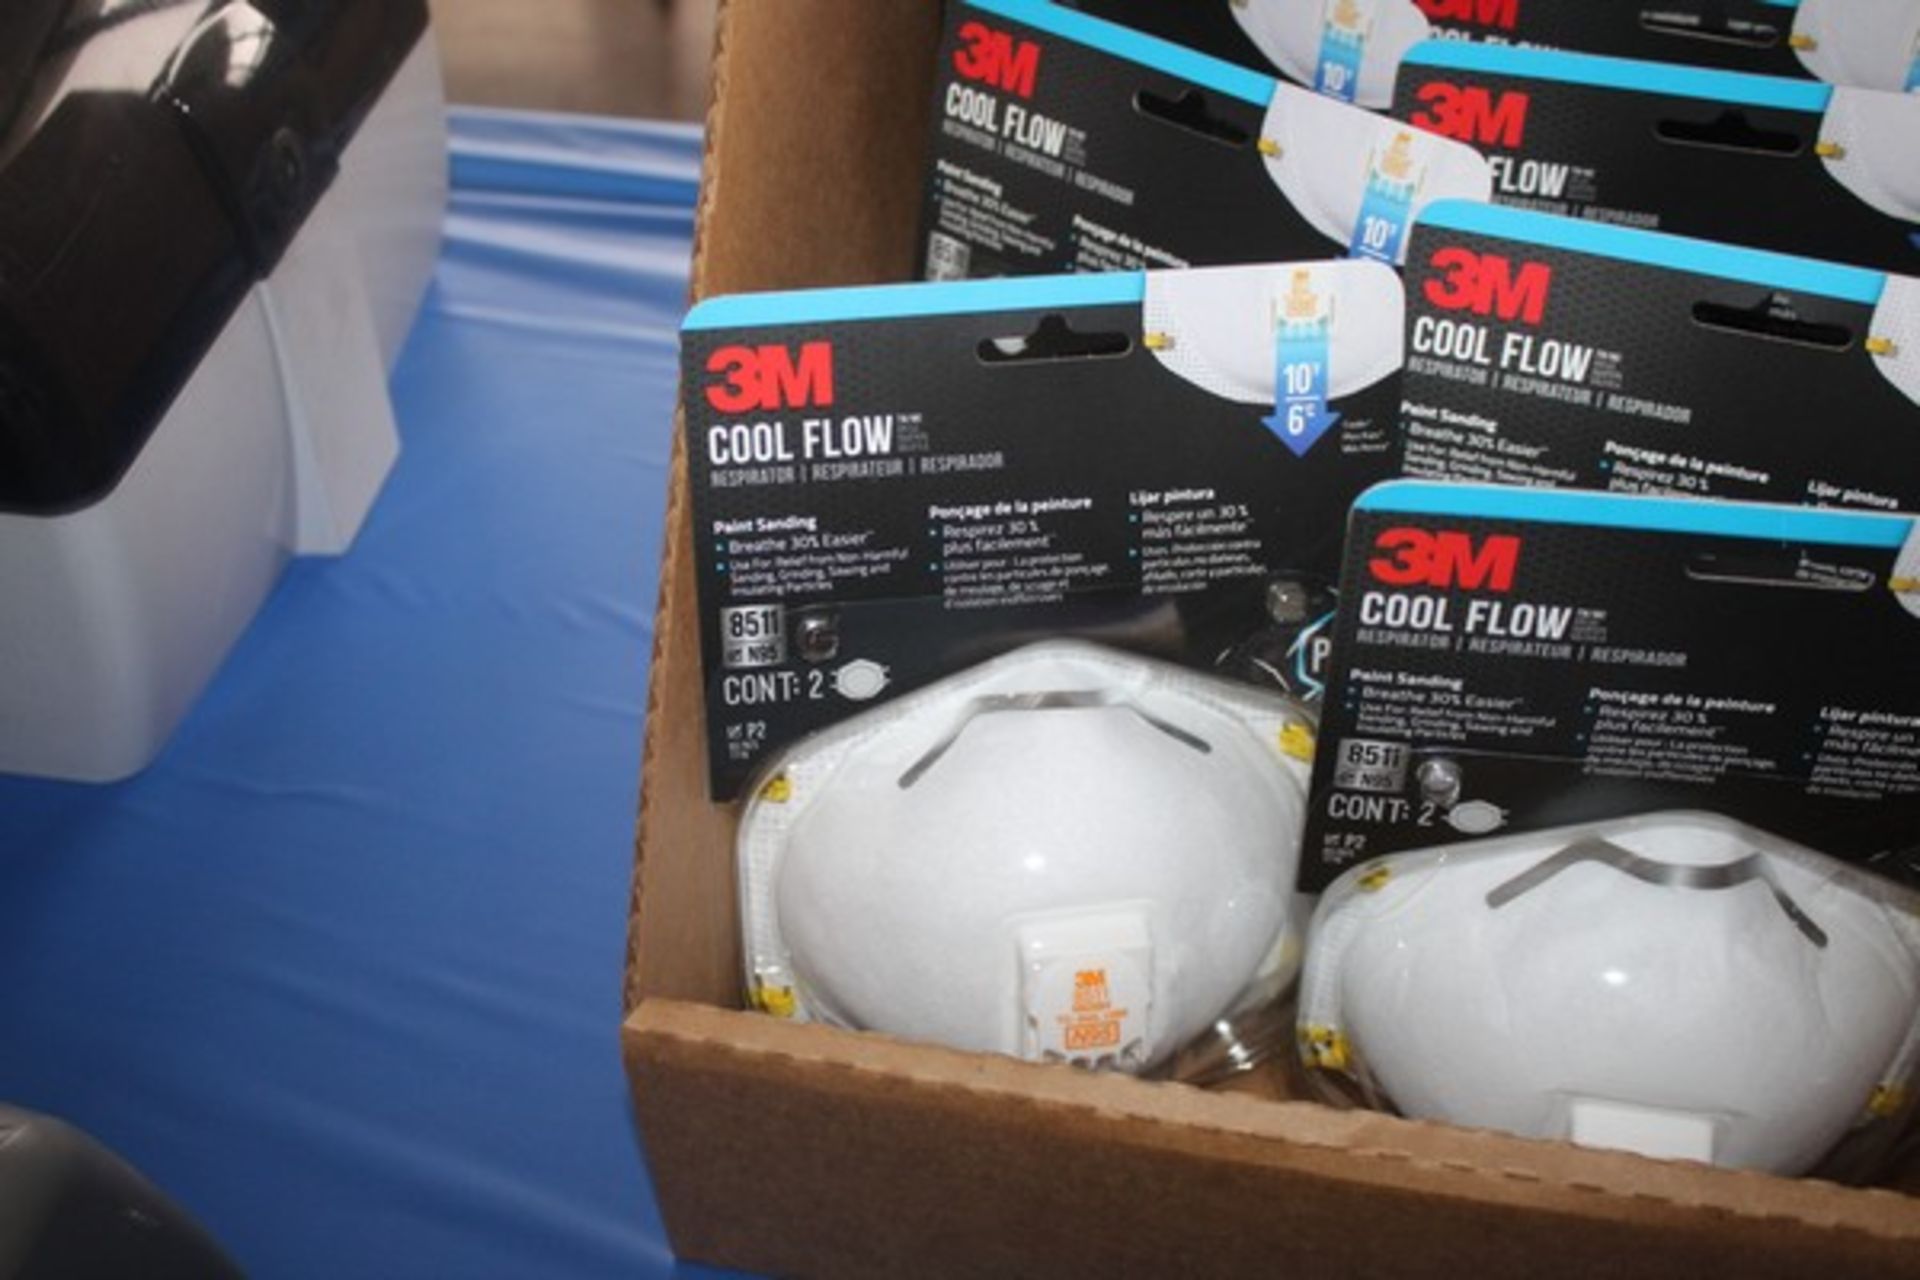 (10) 3M COOLFLOW MODEL 8511-N95 RESPIRATOR MASKS, TWO PER PACKAGE - Image 2 of 2